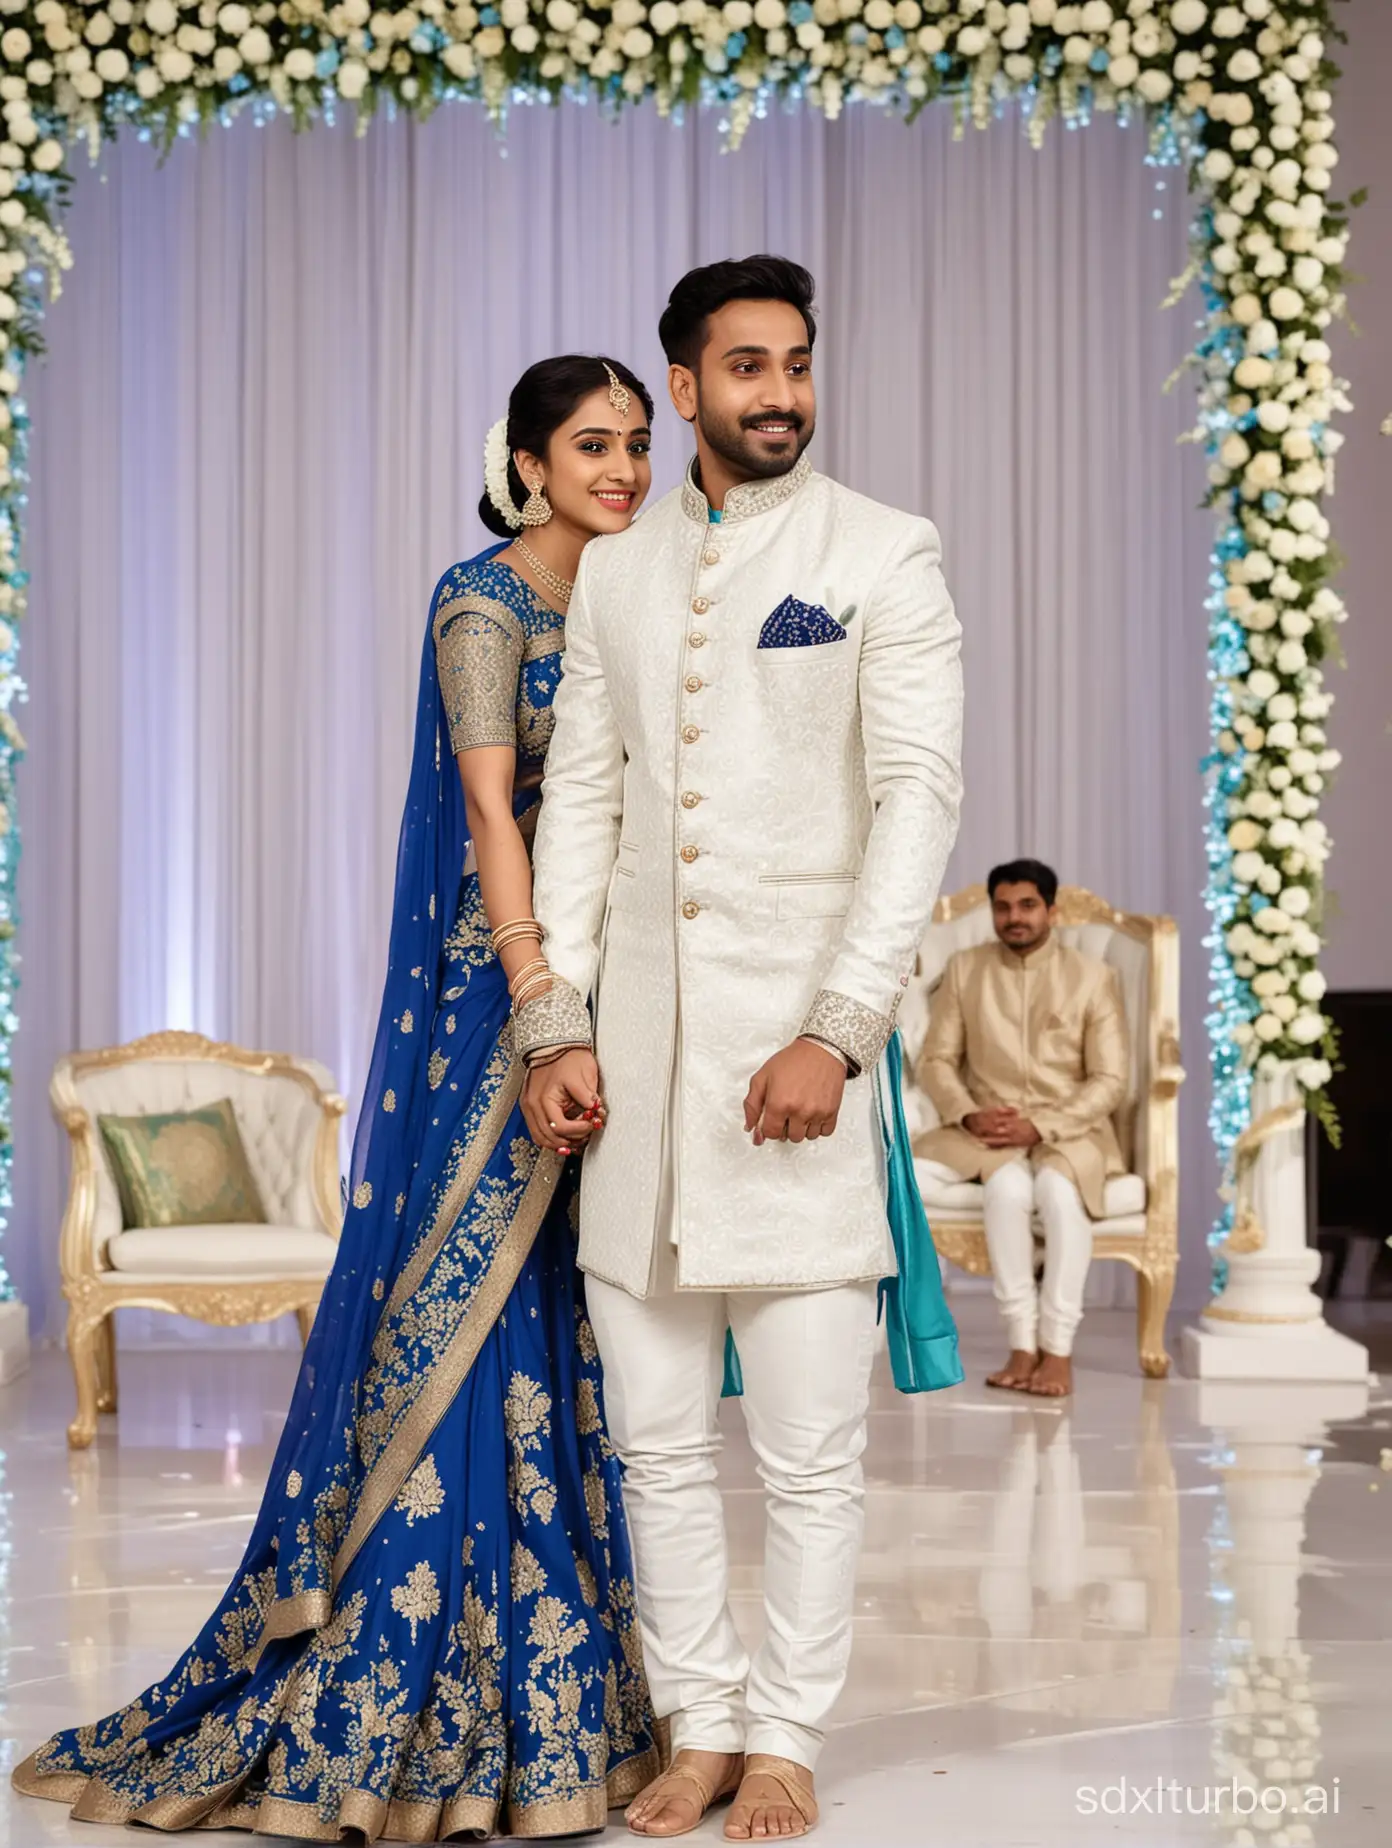 South-Indian-Bride-and-Groom-in-Royal-Blue-and-AquaWhite-Attire-with-Floral-Stage-Background